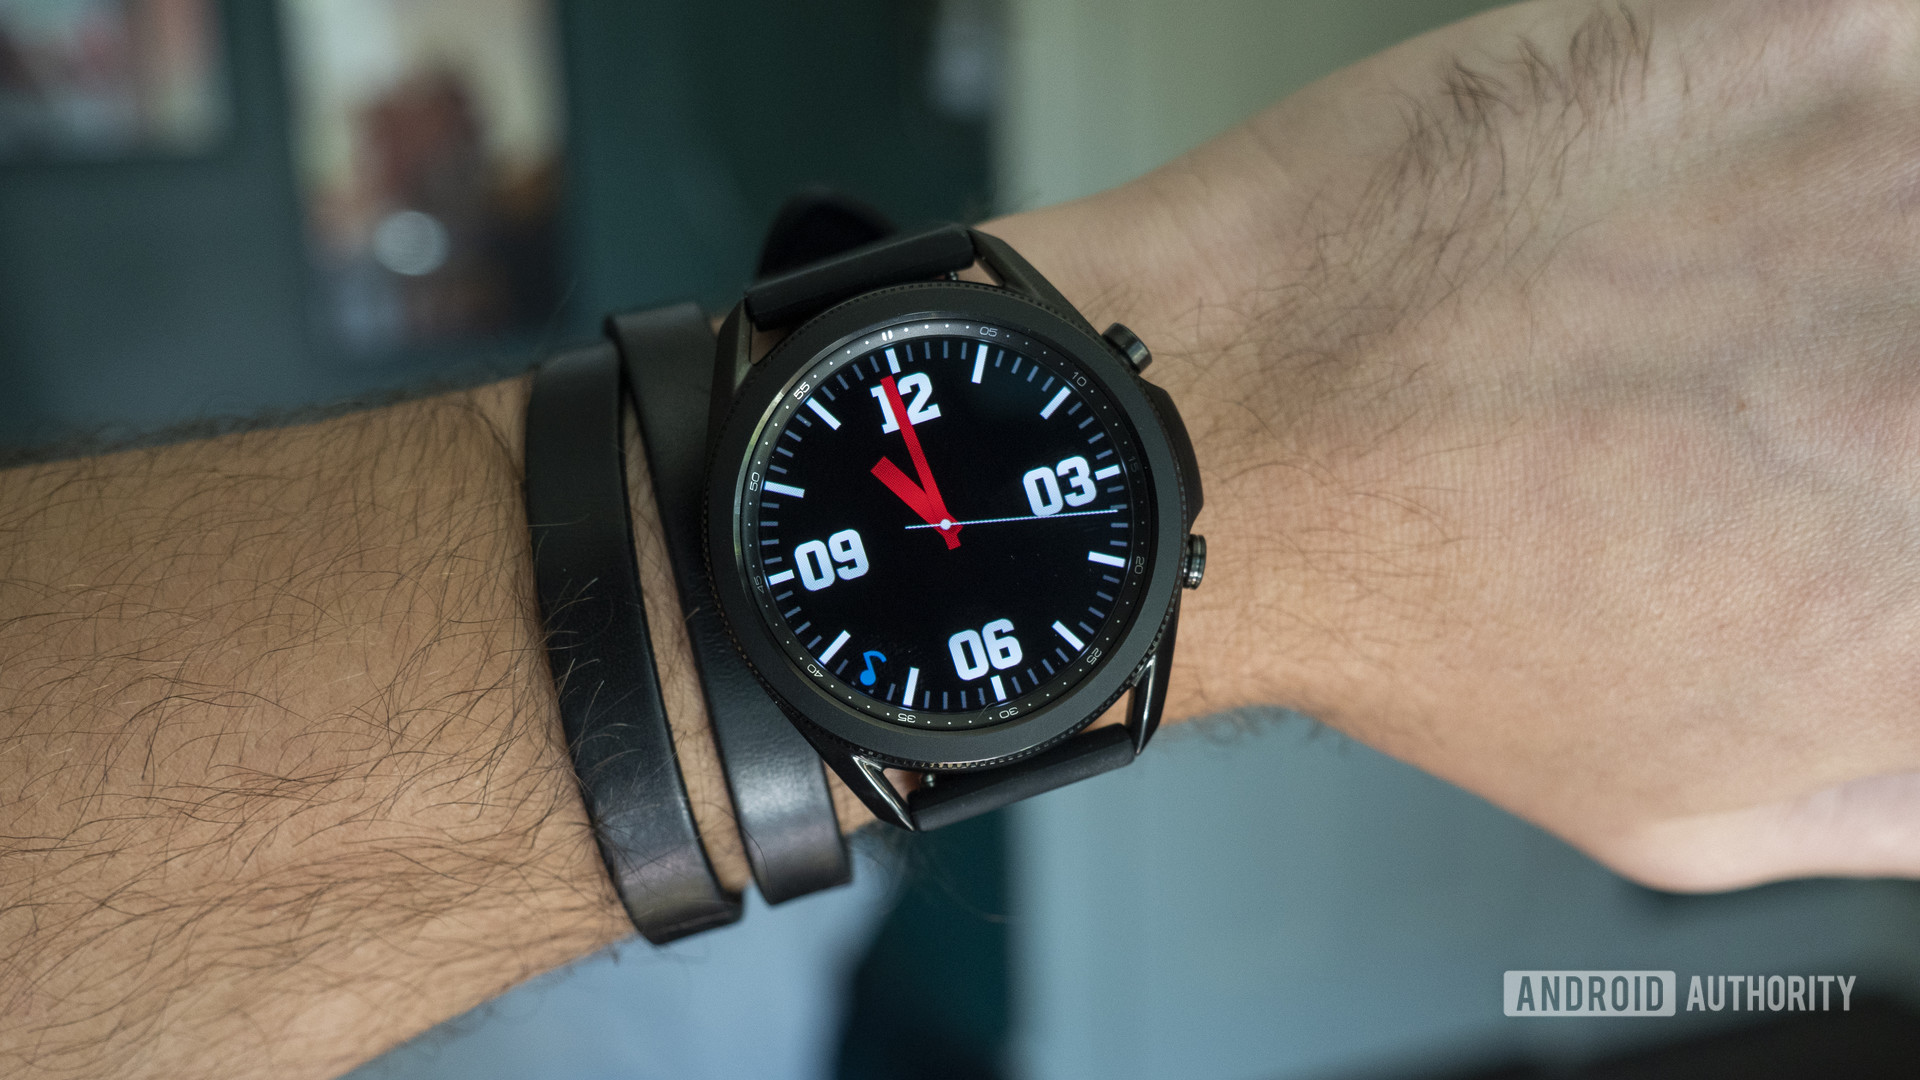 A Samsung Galaxy Watch 3 on a user's wrist displays the the time.